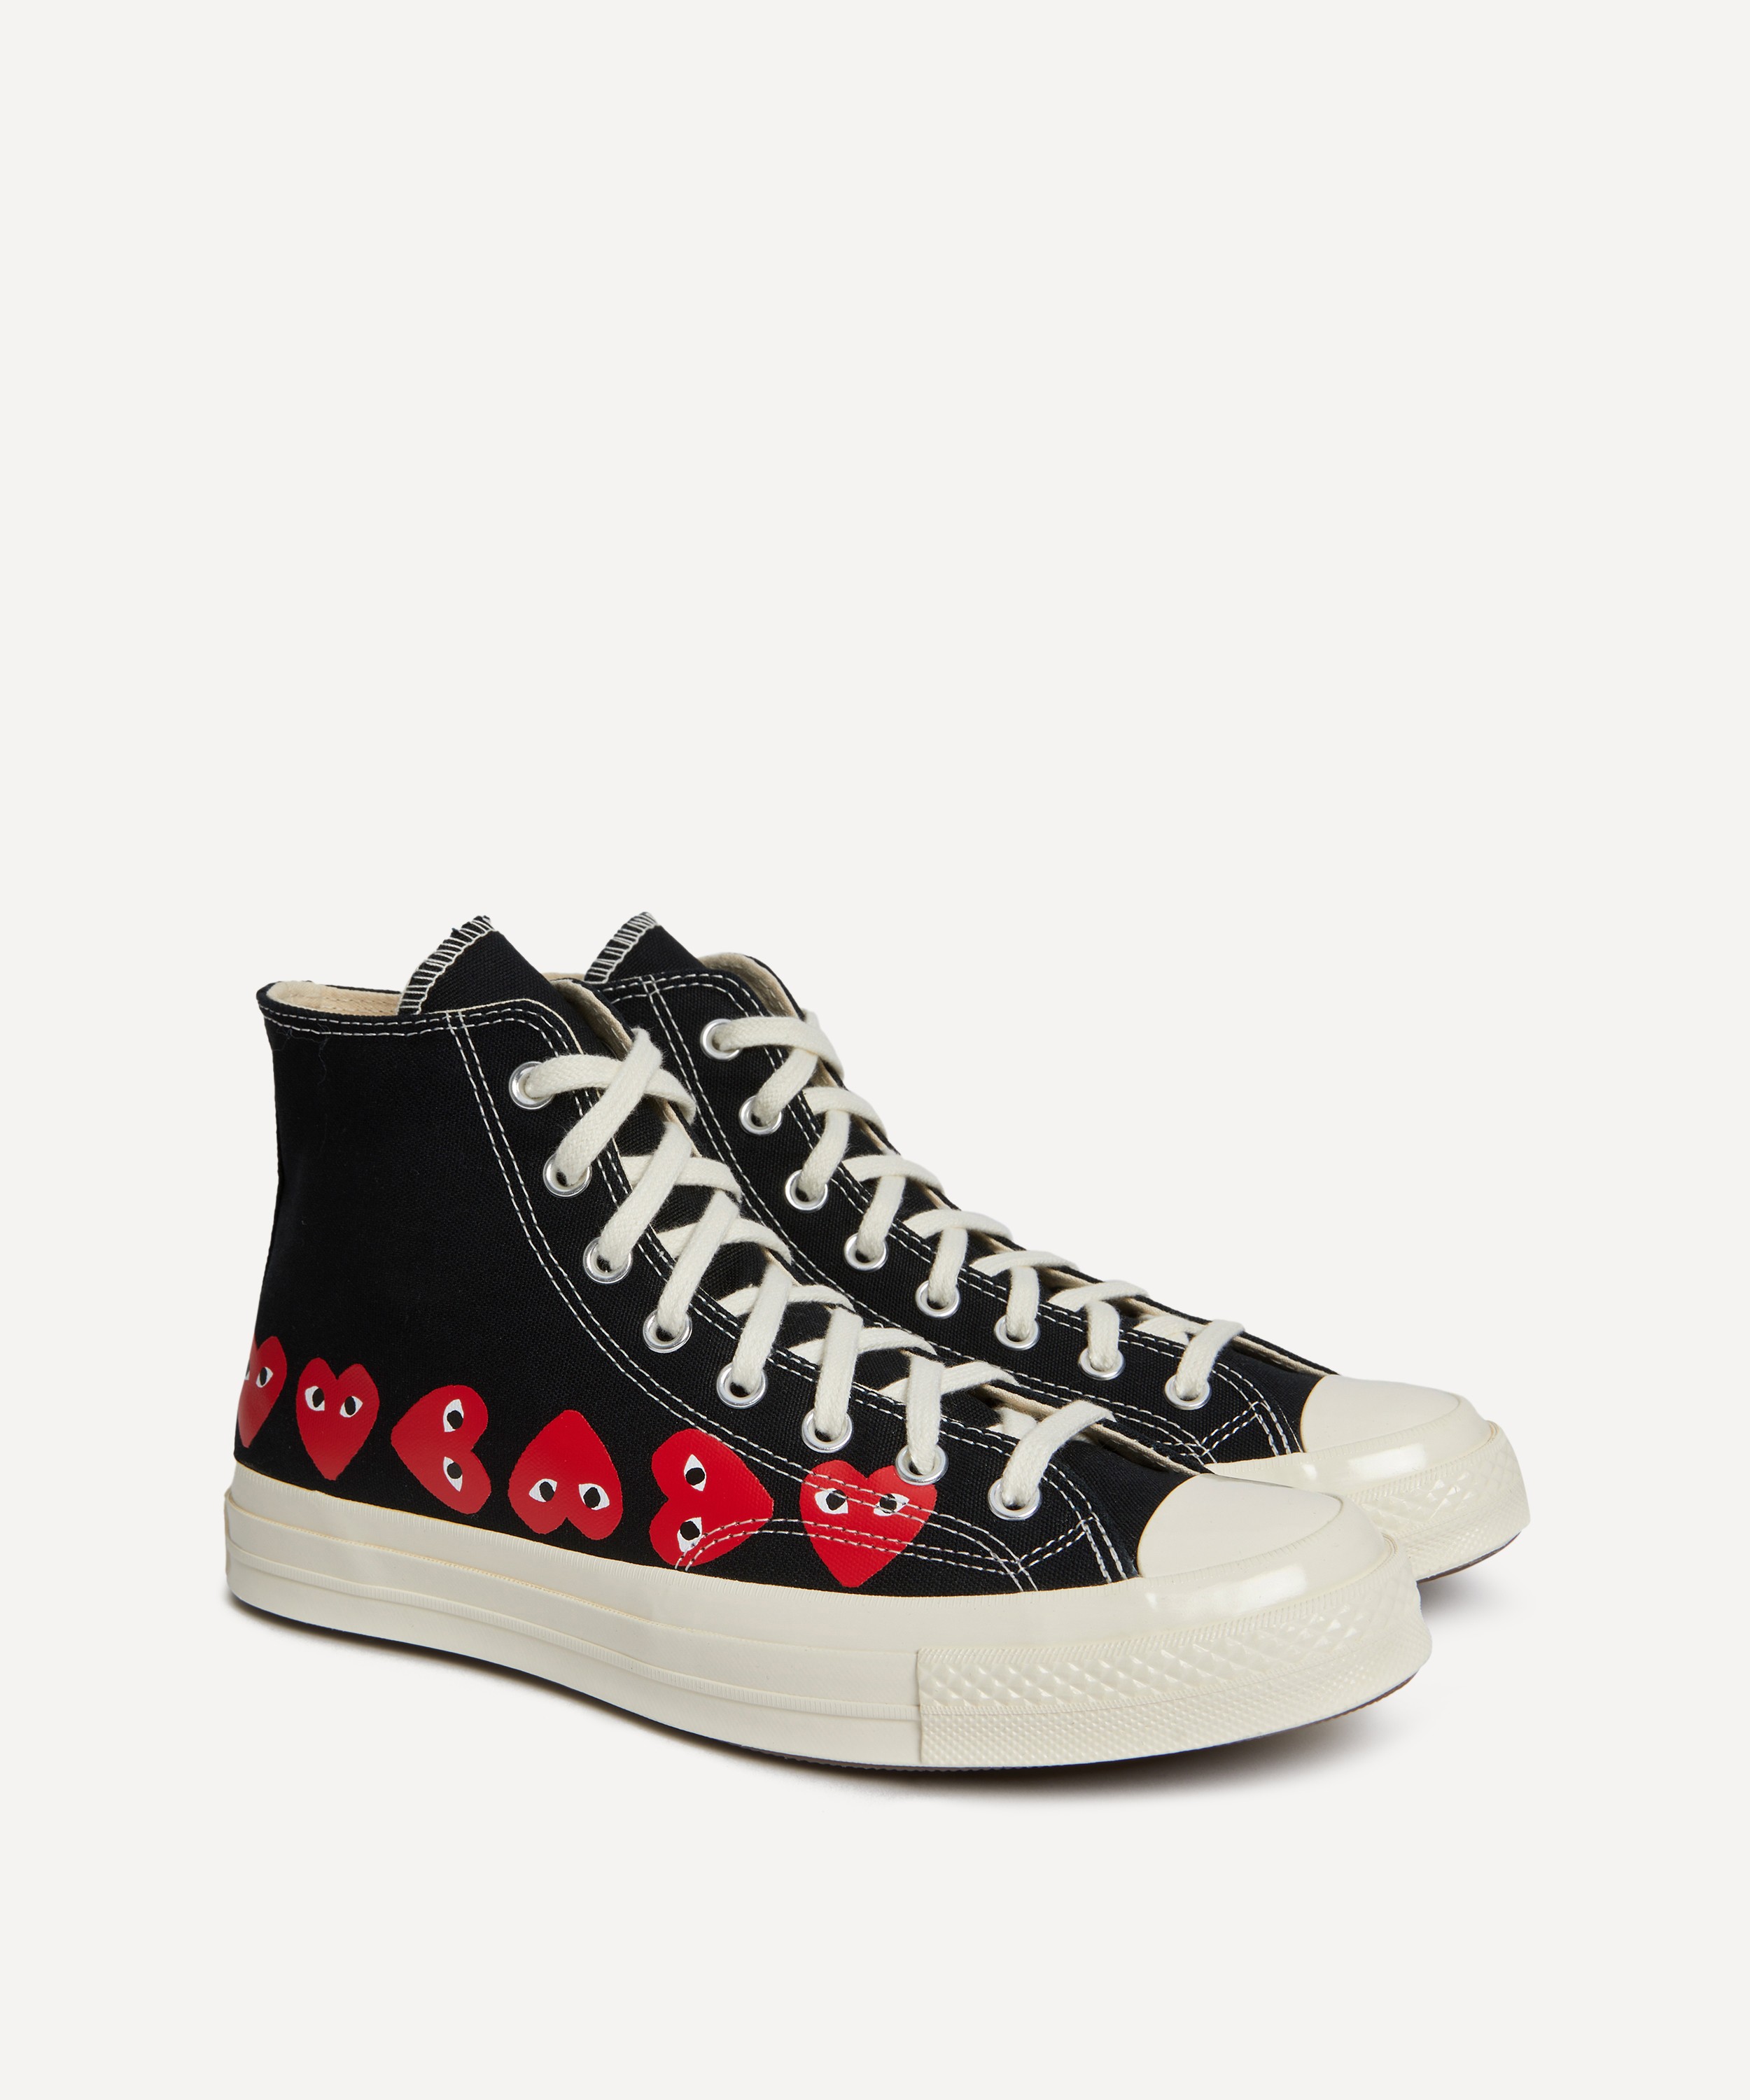 Comme des Garçons Play - x Converse The Chuck Taylor All Star 70s Canvas High-Top Trainers image number null